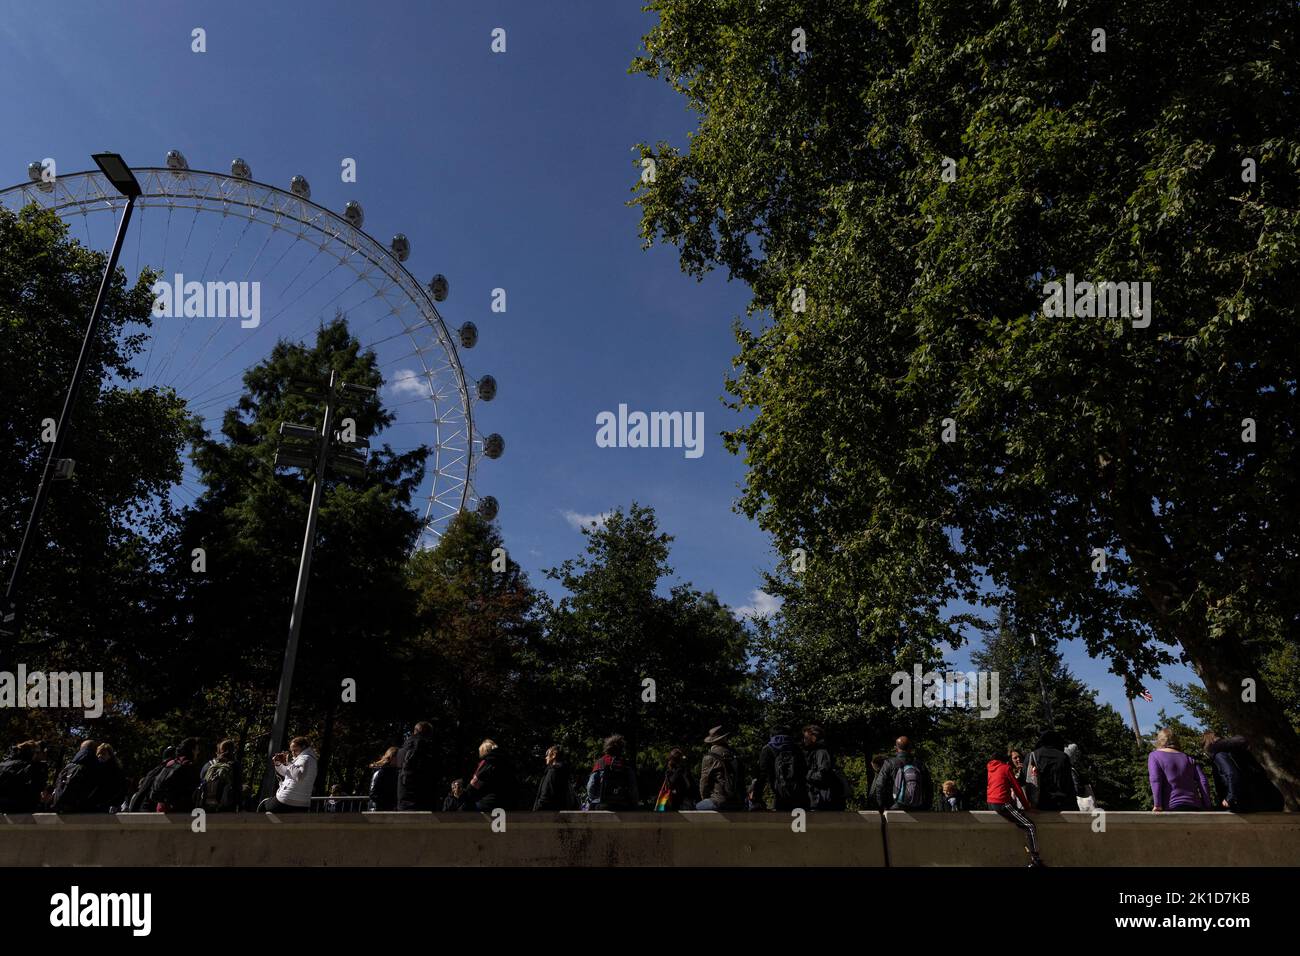 The London Eye wheel is seen as people stand in a queue to pay respect to Britain's Queen Elizabeth, following her death, in London, Britain September 17, 2022. REUTERS/Carlos Barria Stock Photo